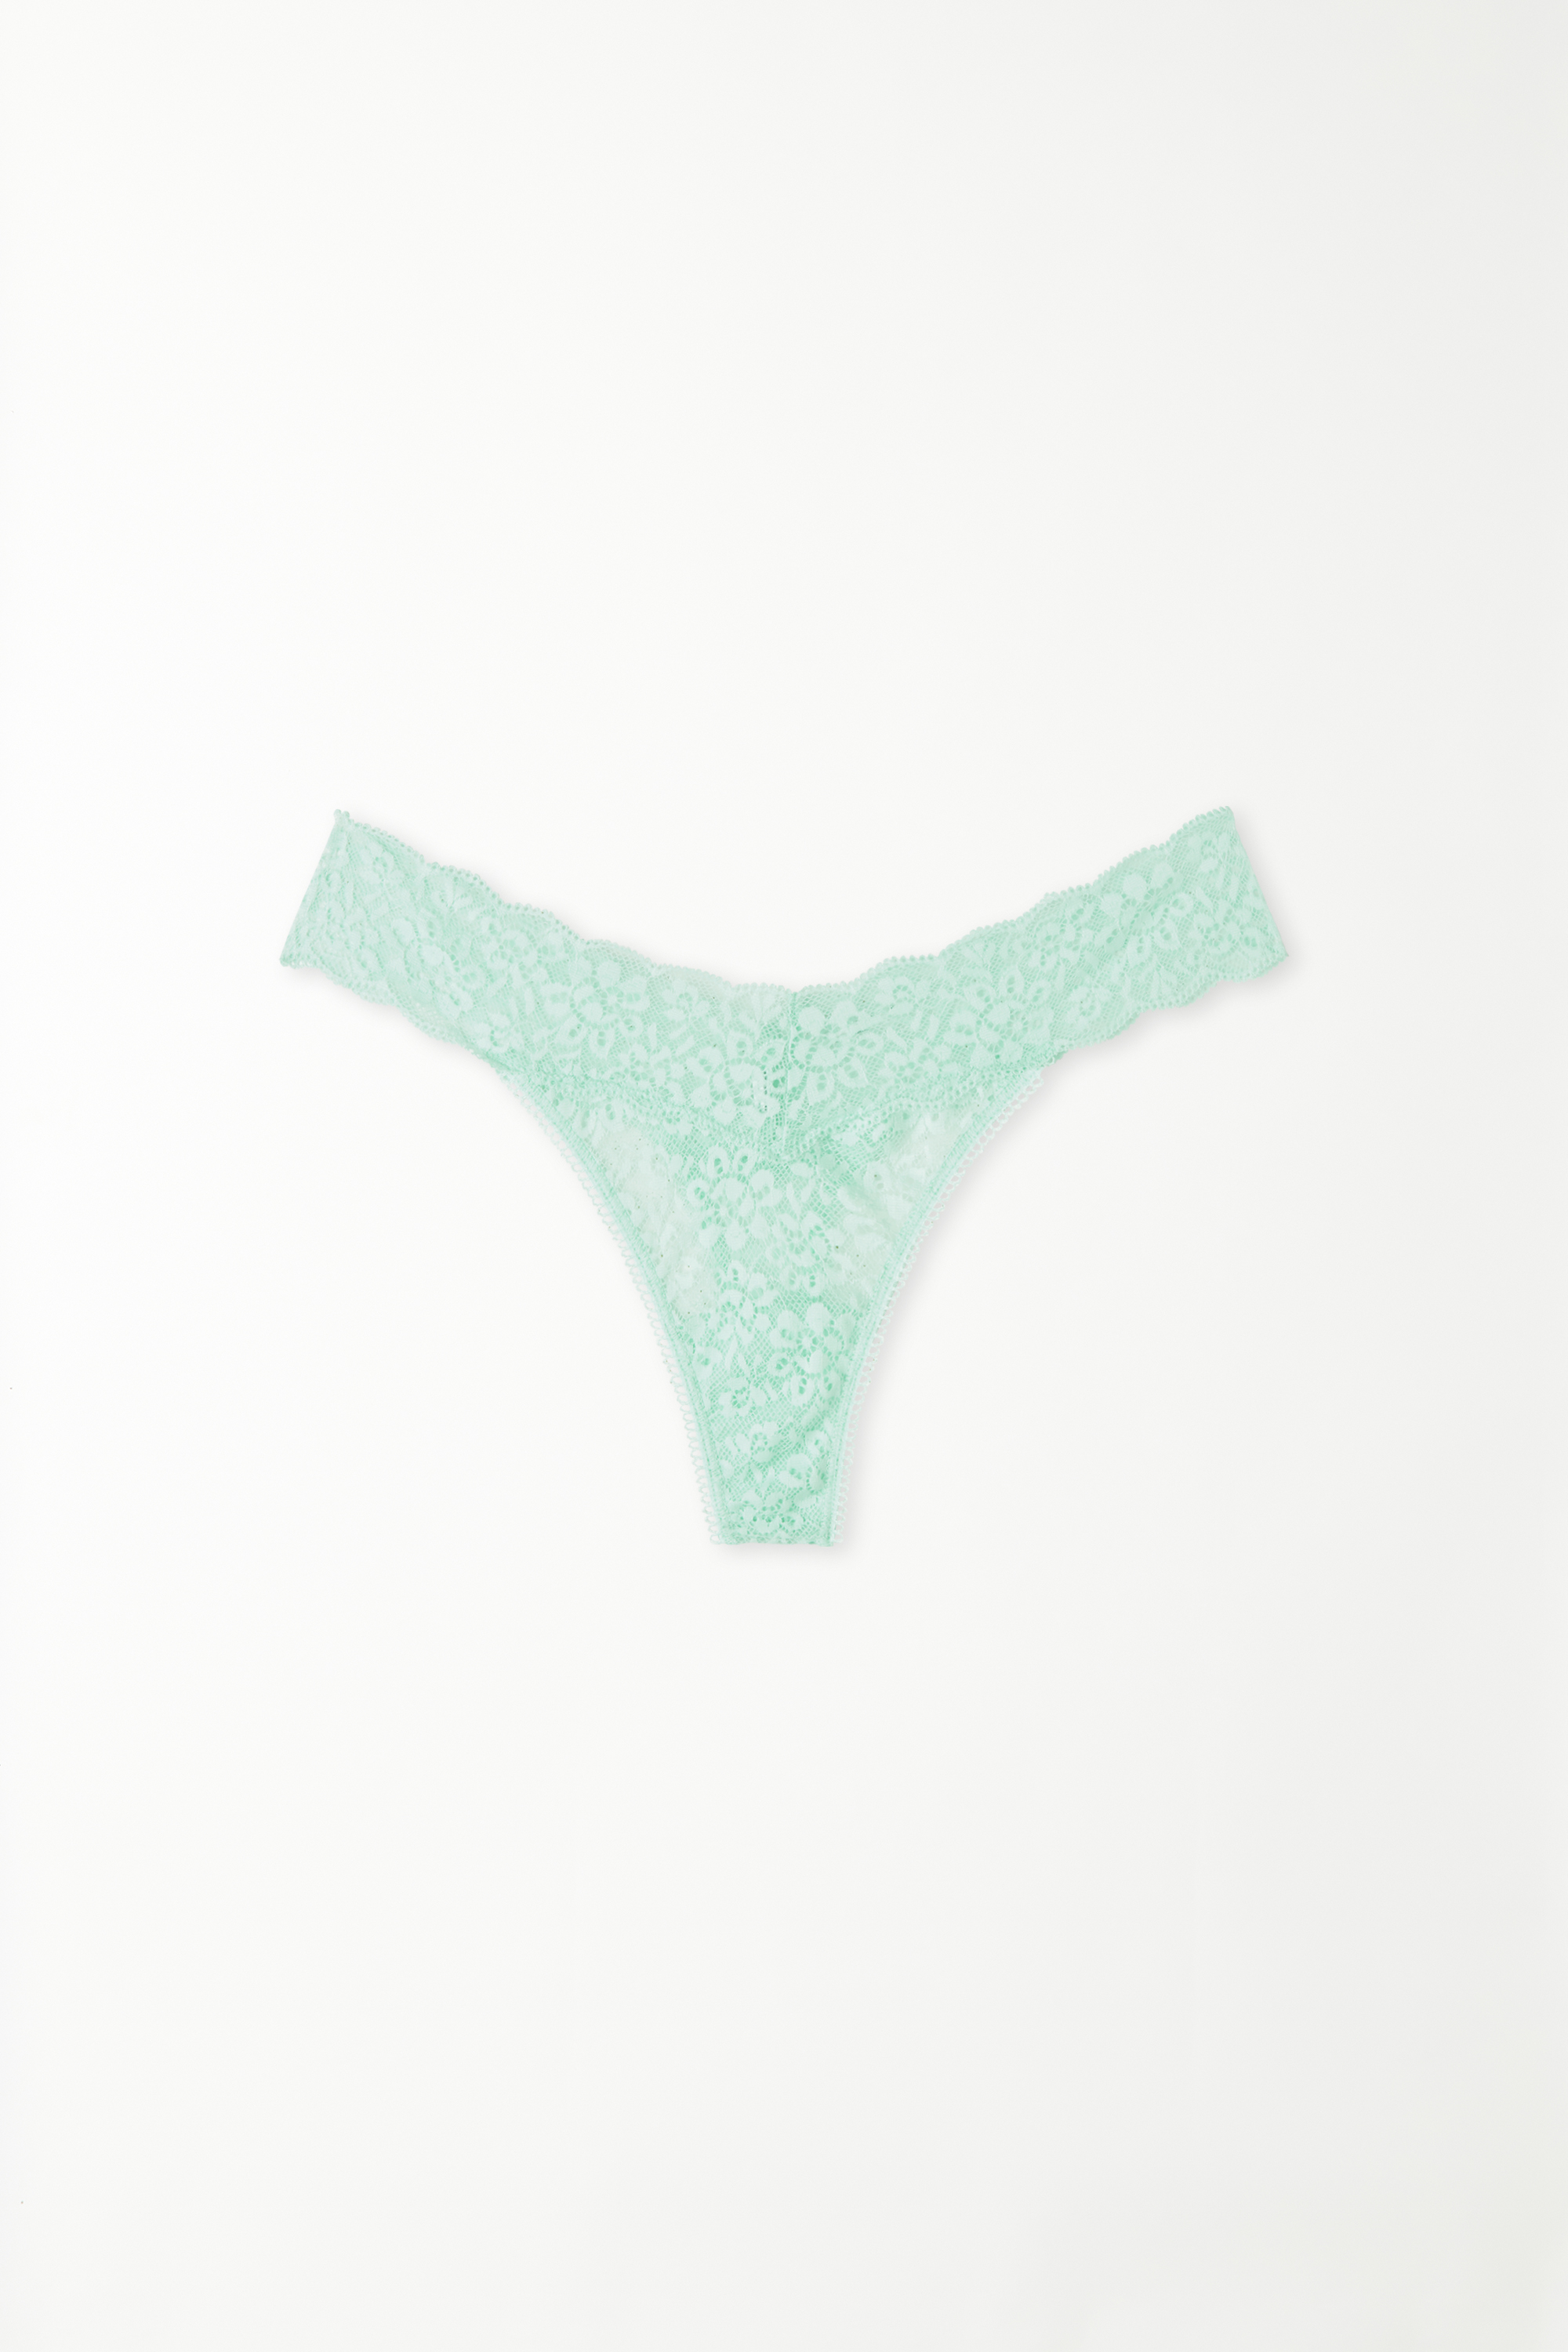 Recycled Lace High-Cut Thong